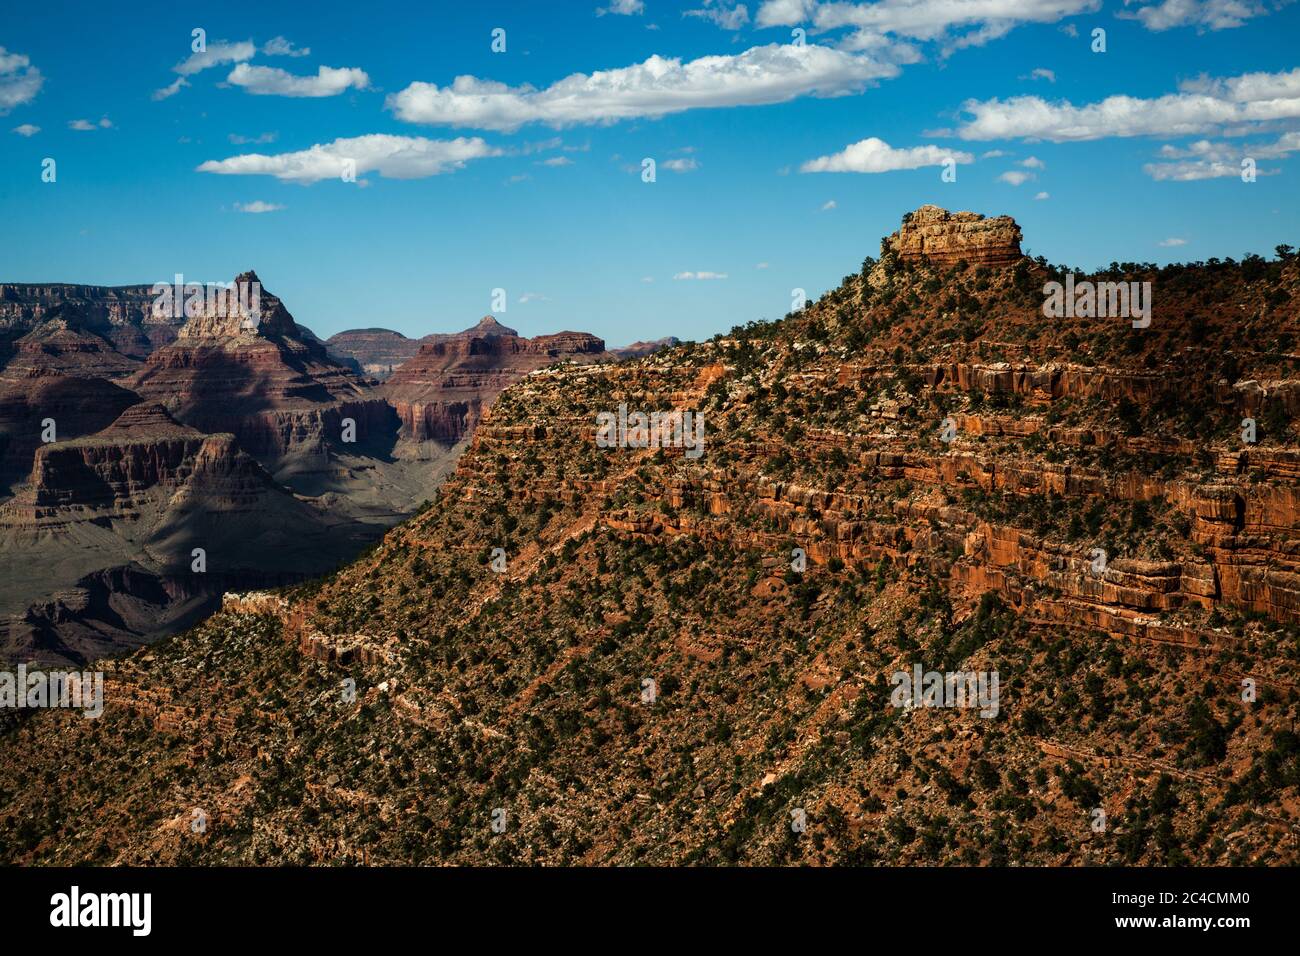 The Grand Canyon, one of the seven natural wonders of the world. Stock Photo